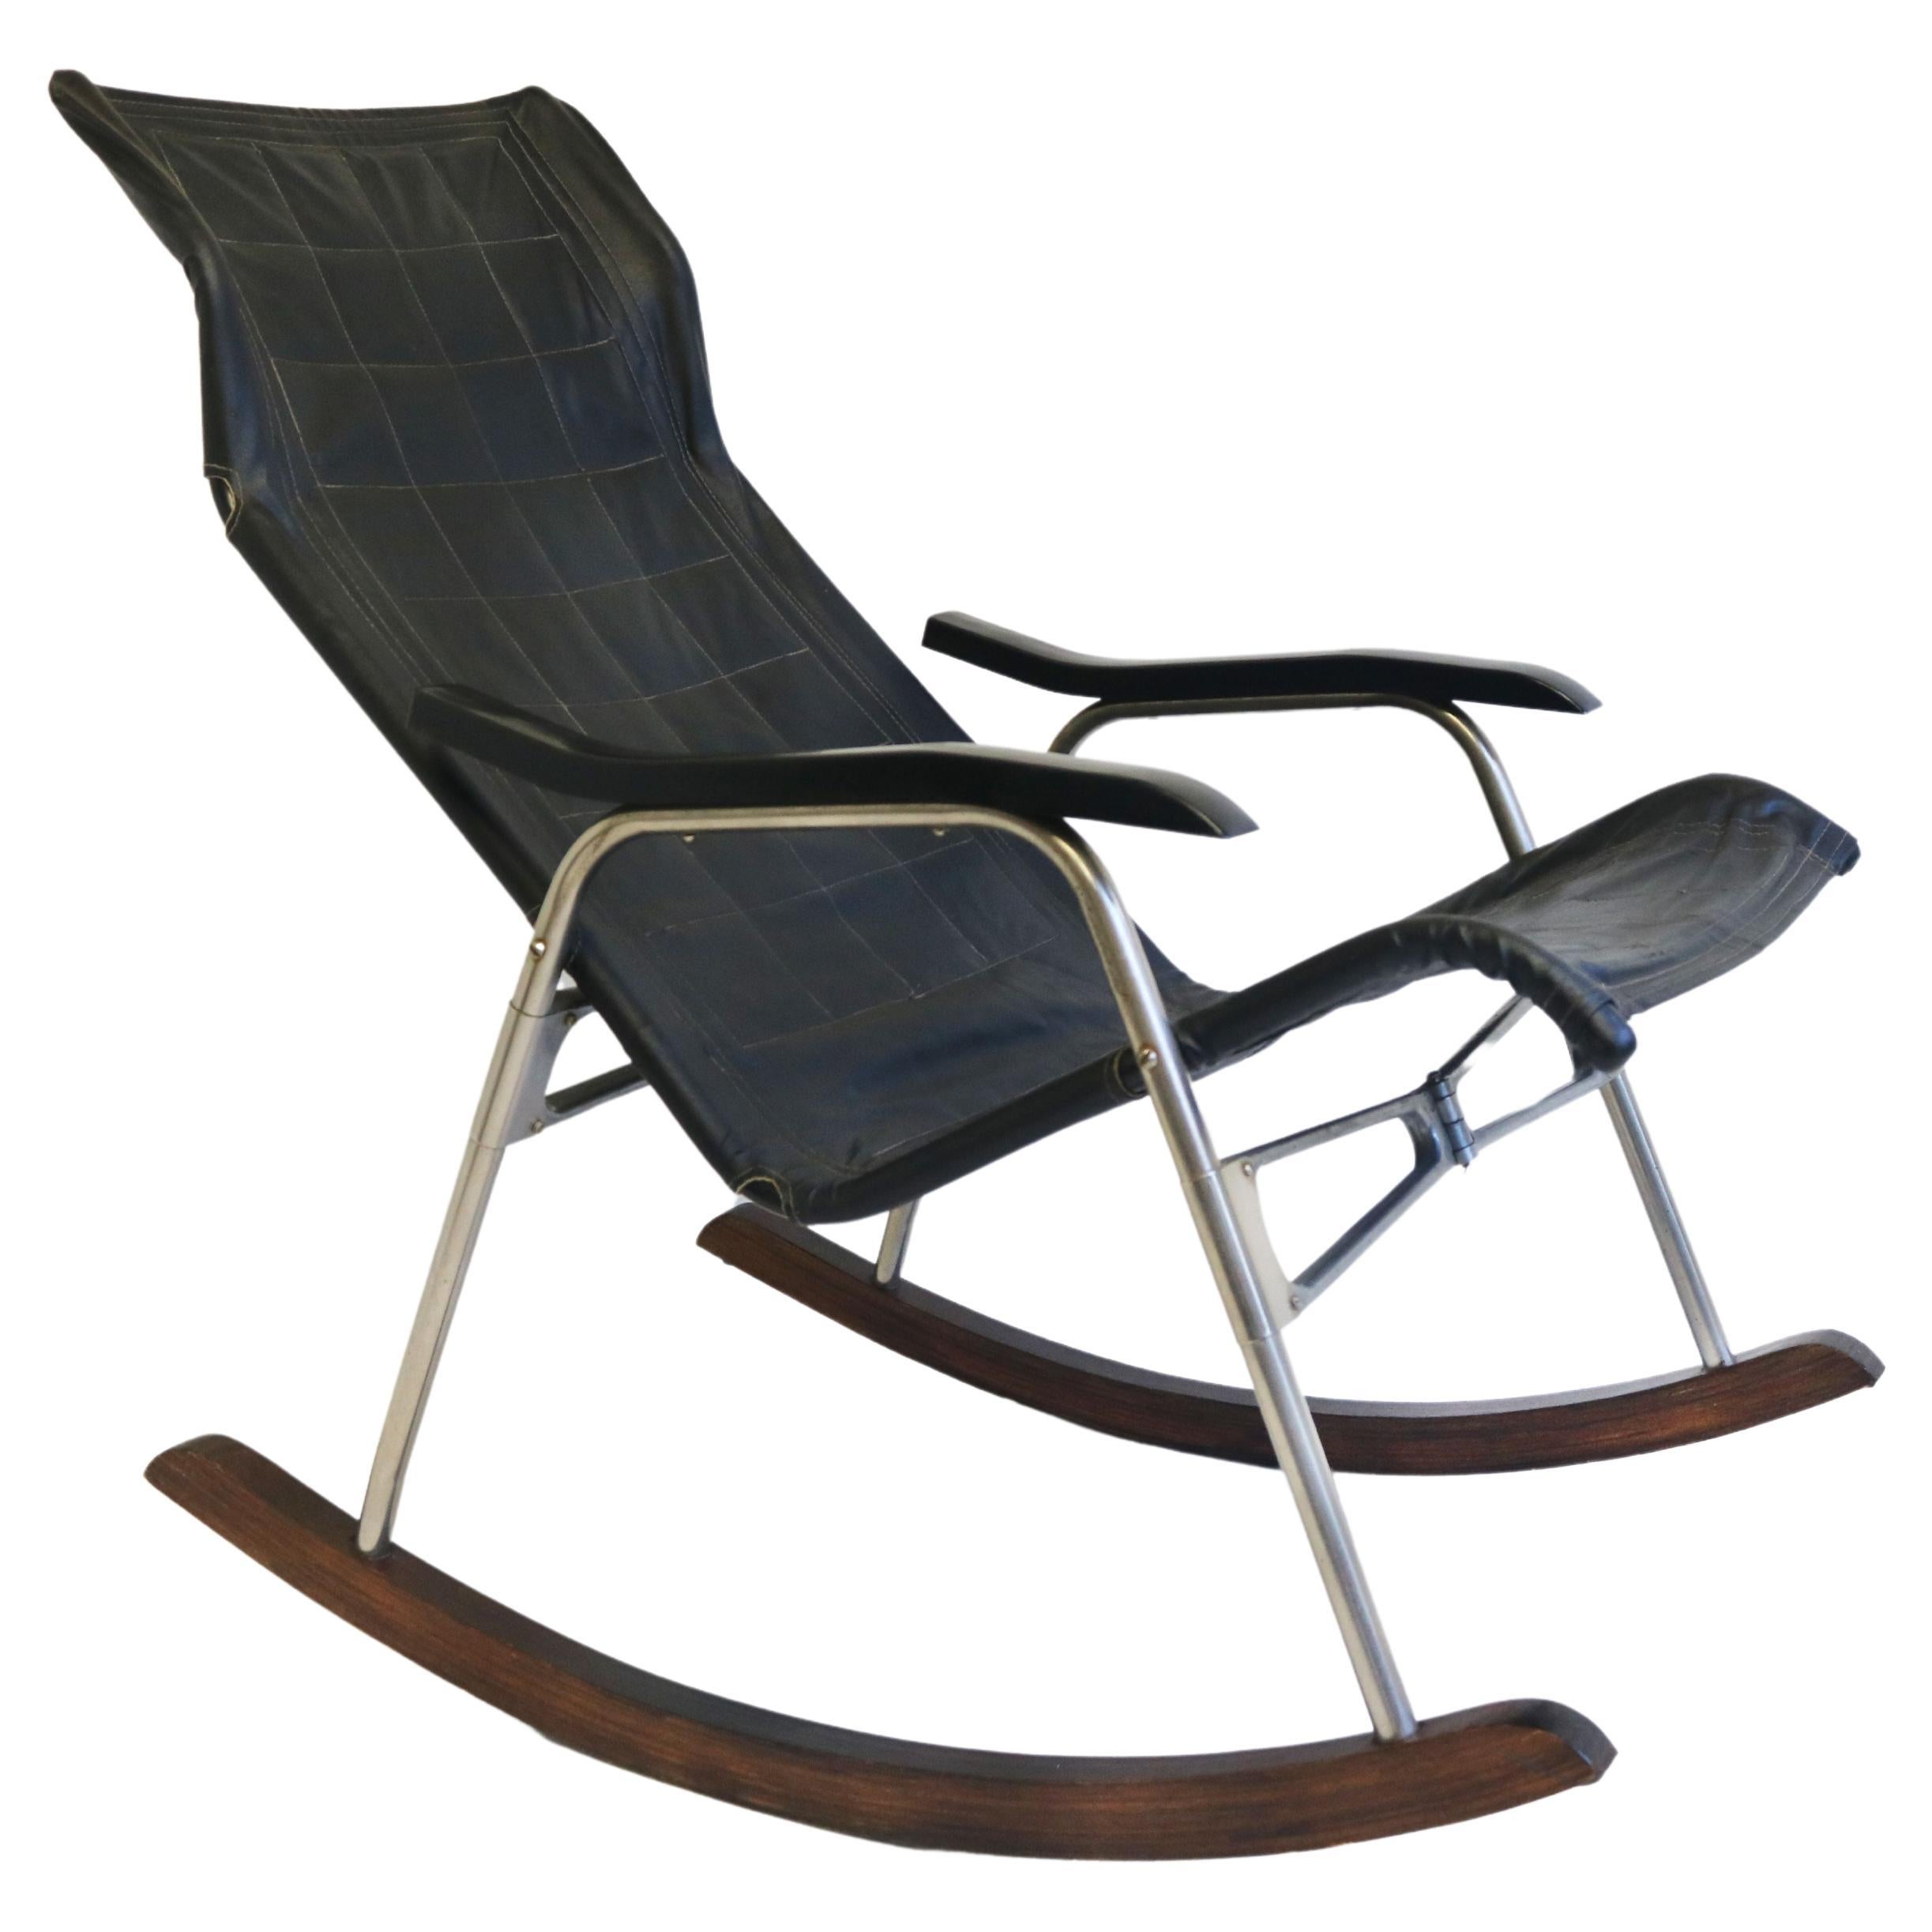 Rare Mid-Century Modern Design rocking chair by Takeshi Nii 1960 Black leather